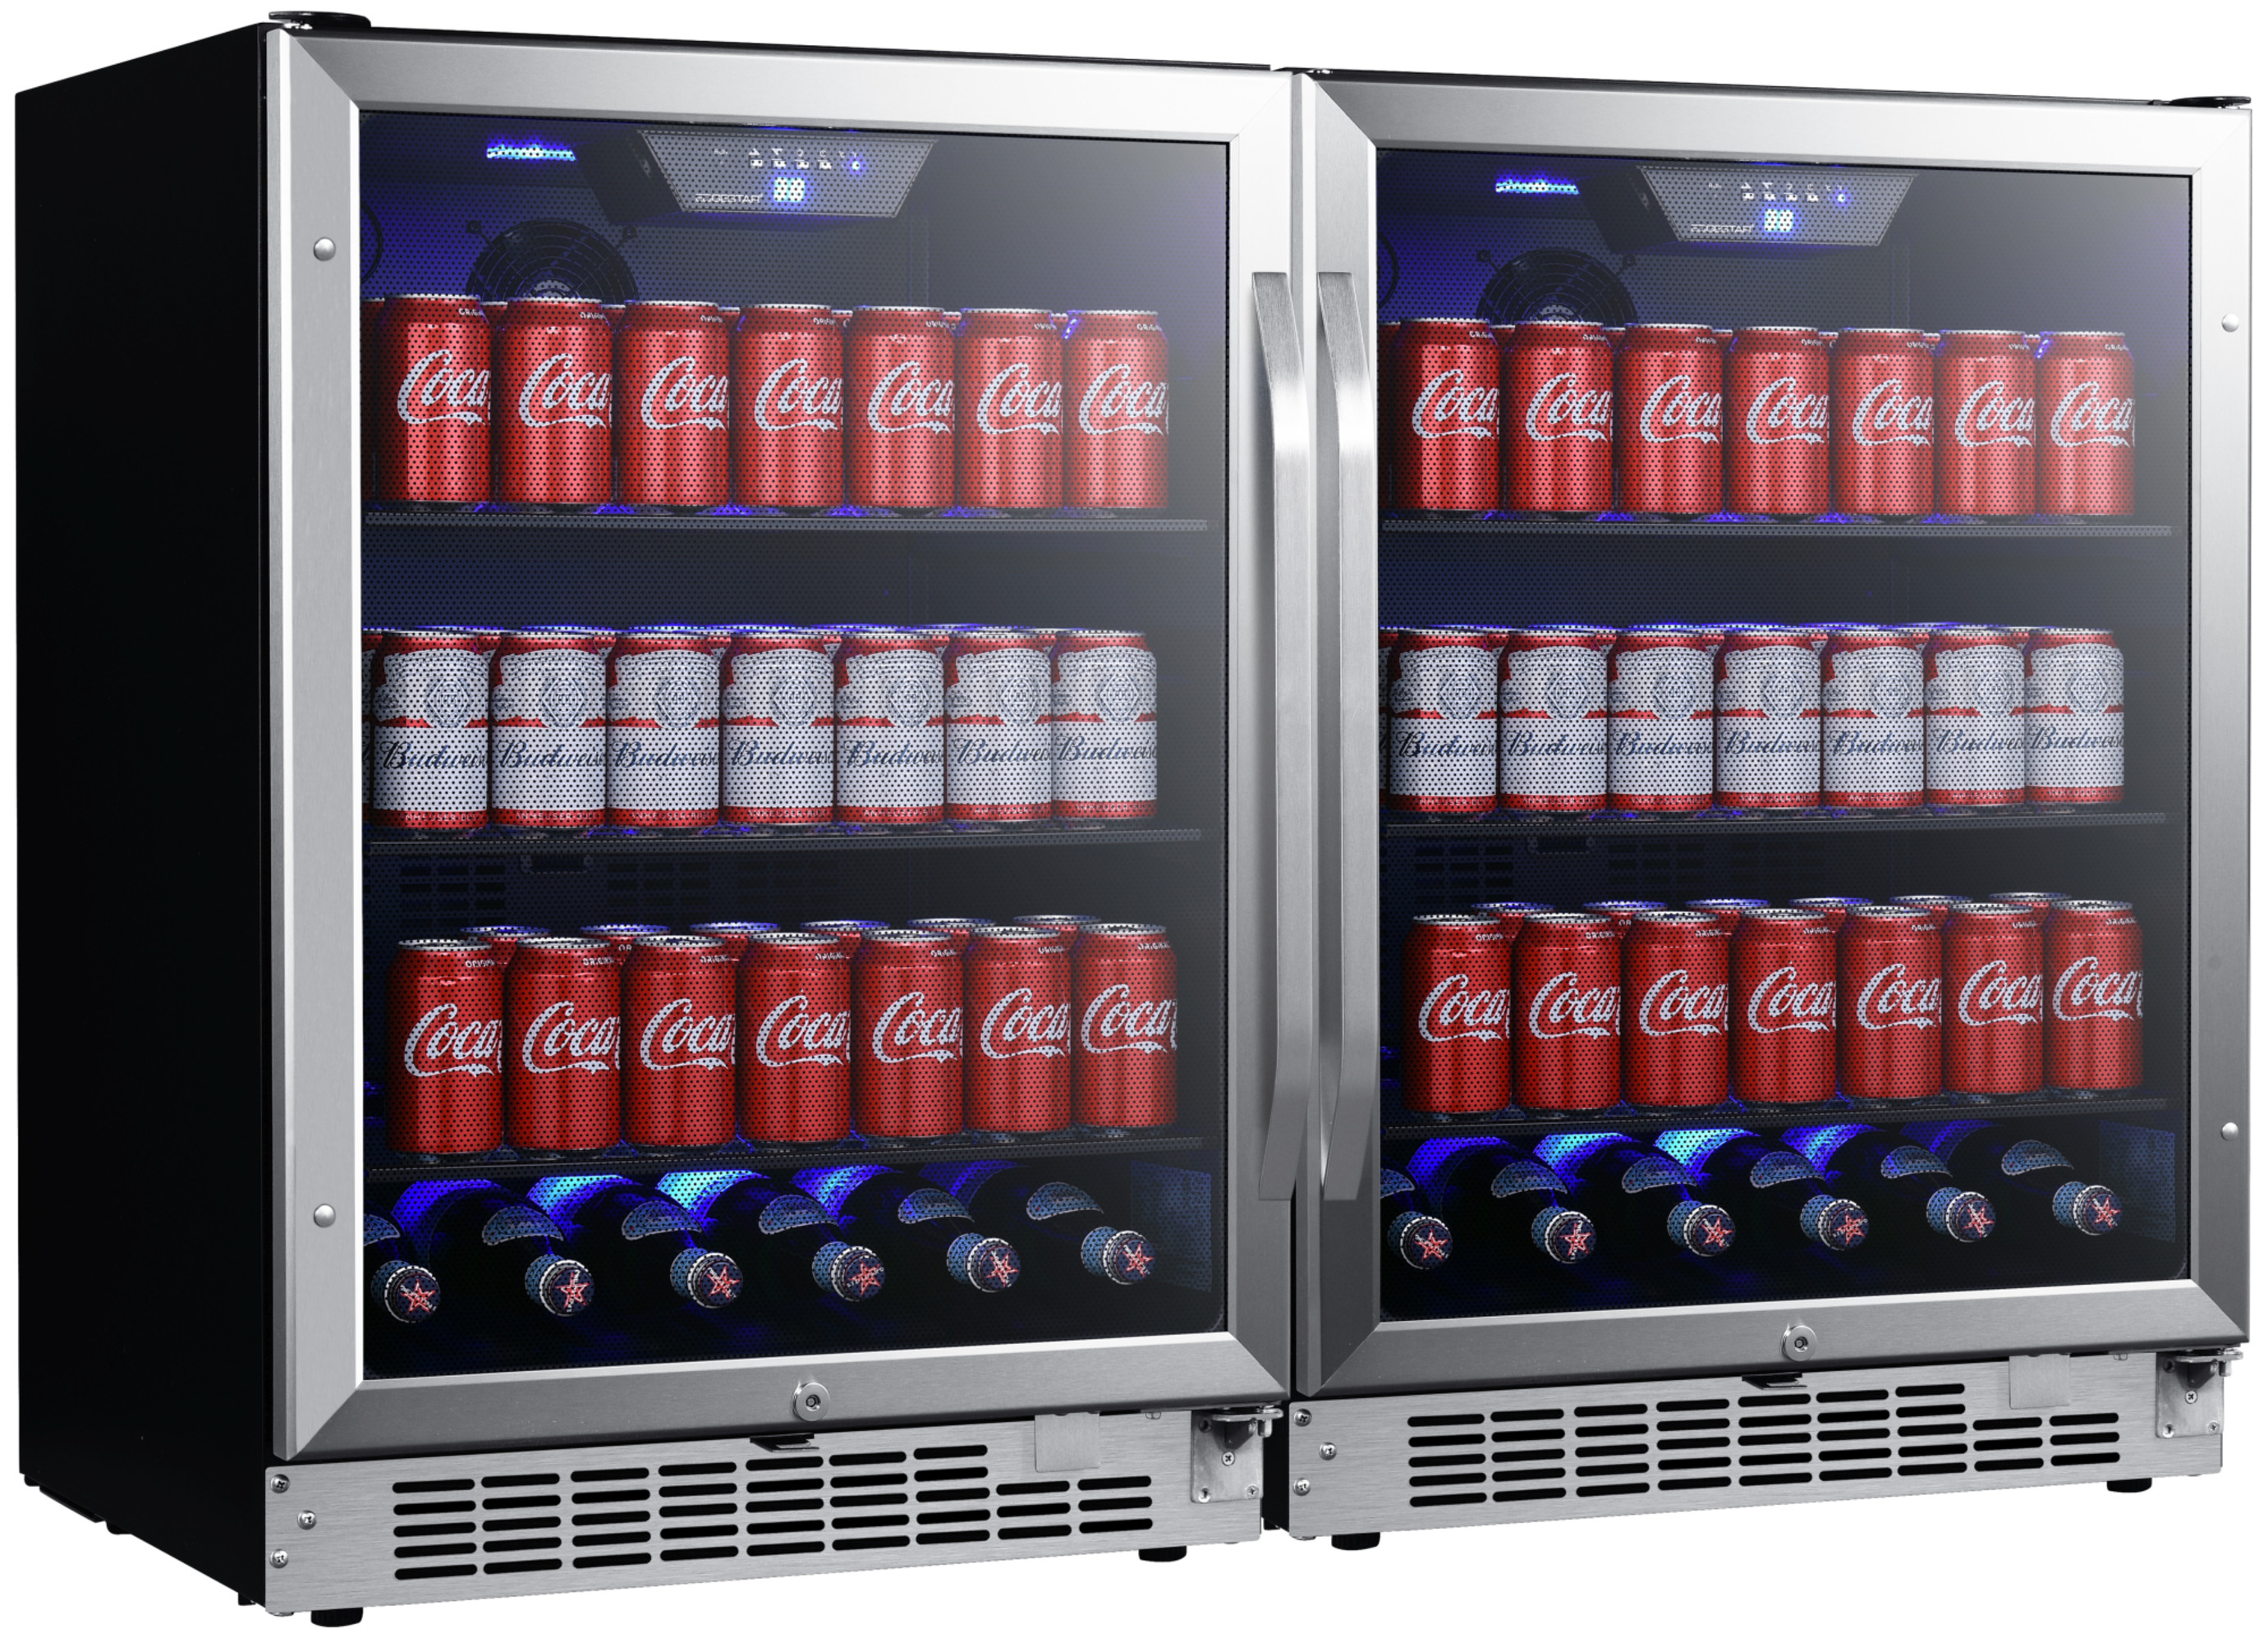 Edgestar Cbr1502sgdual 48" Wide 284 Can Built-In Side-By-Side Beverage Cooler - Stainless - image 2 of 2